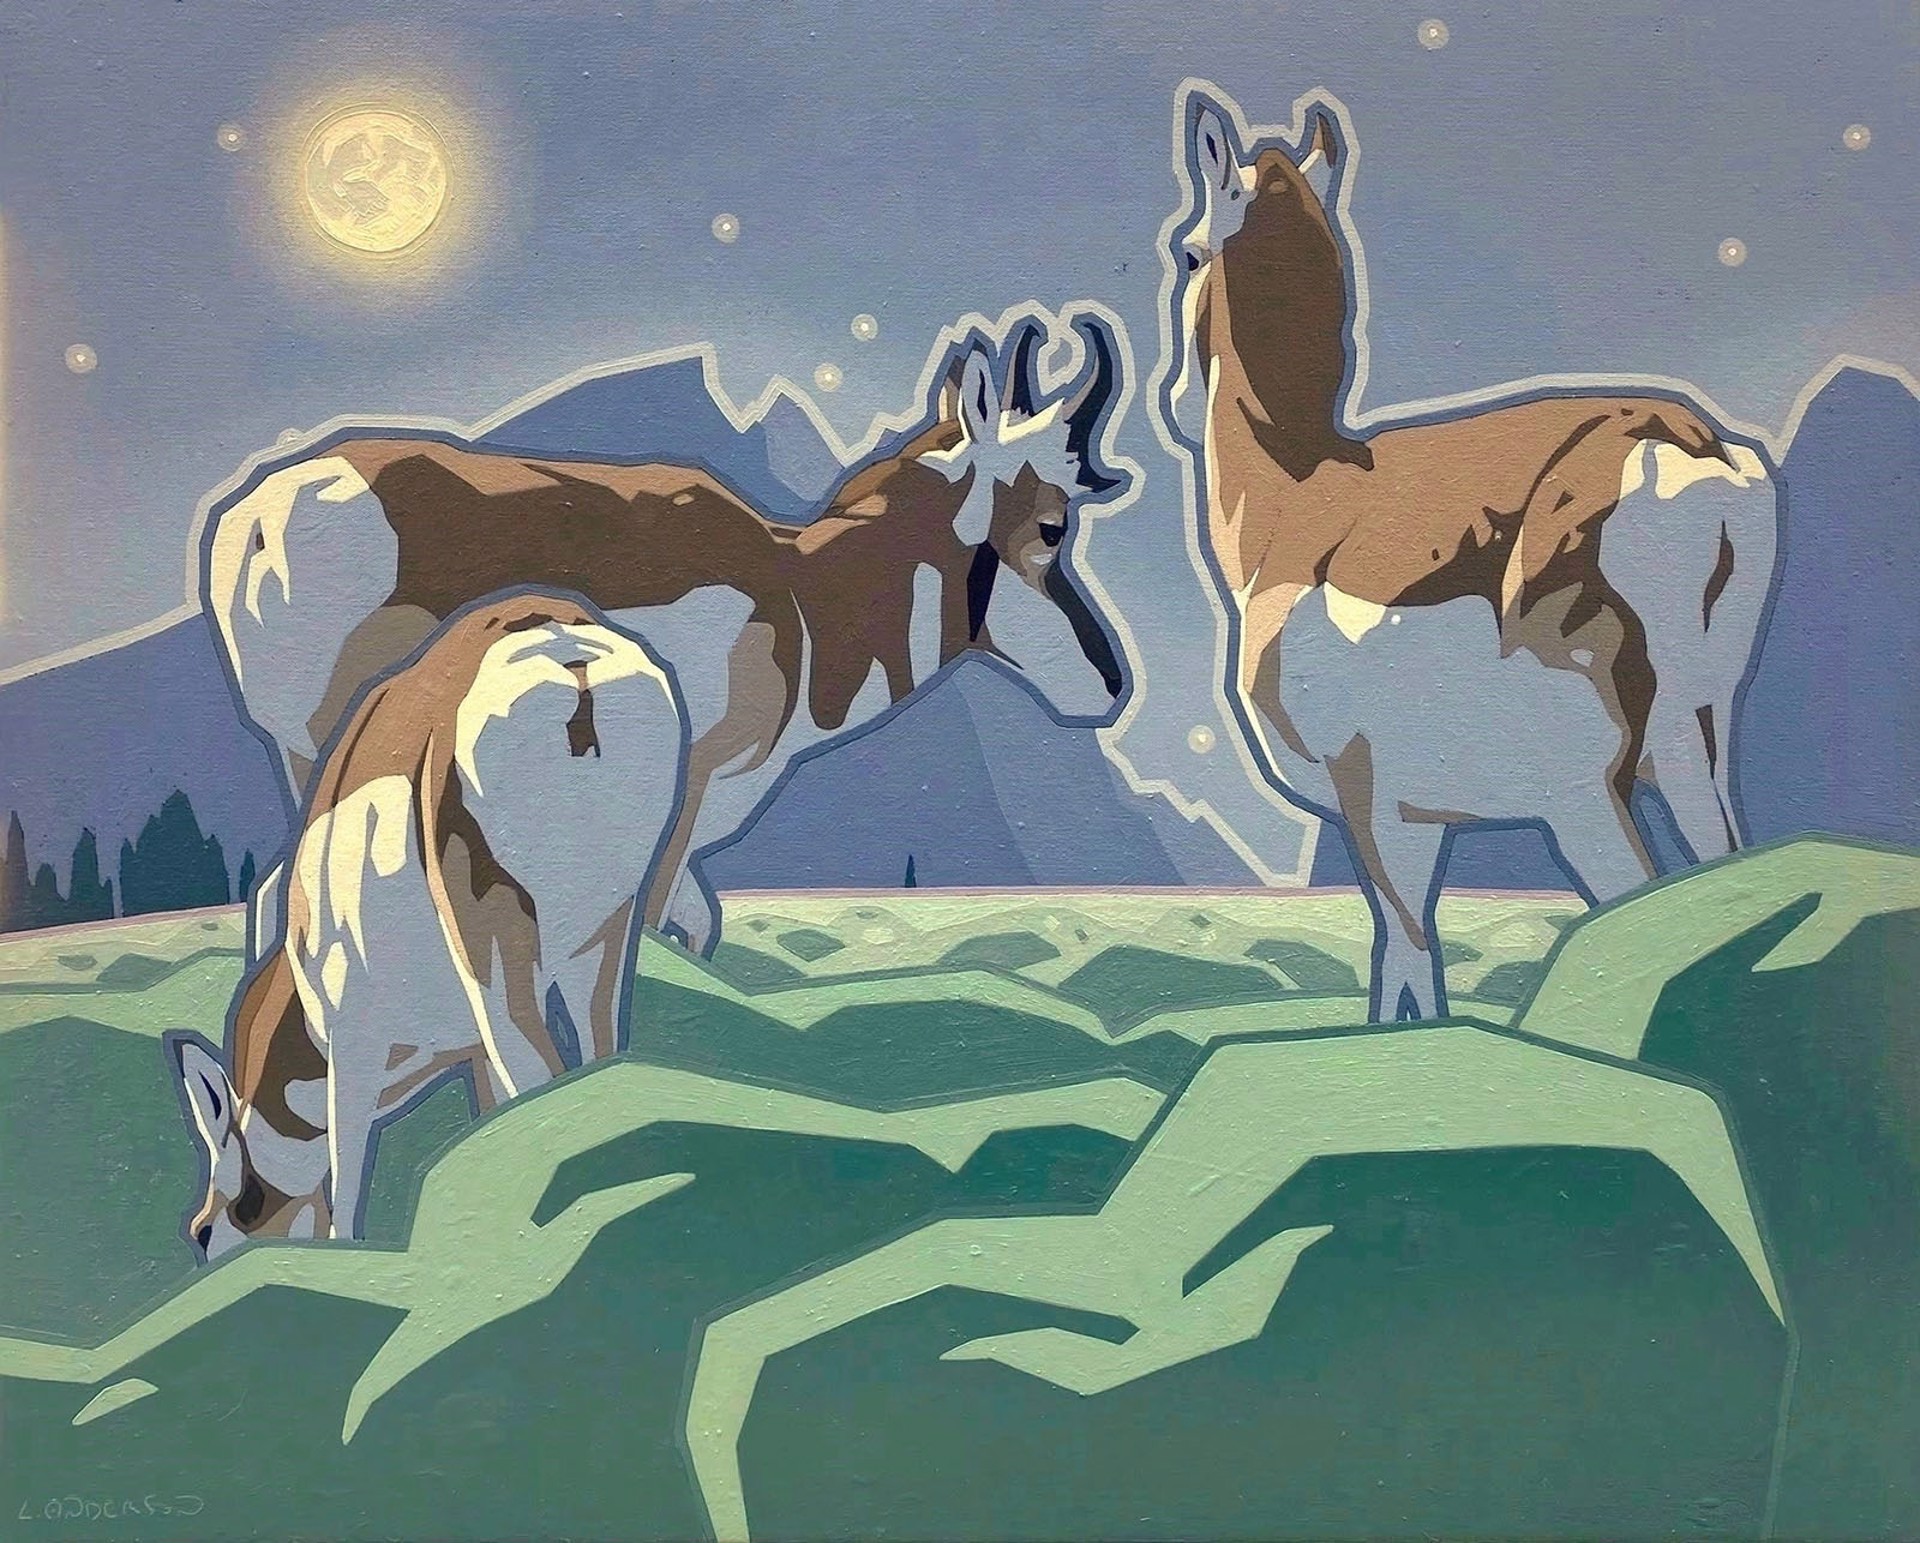 Original Oil Painting By Luke Anderson Featuring Three Pronghorn Antelope On Night Mountain Landscape